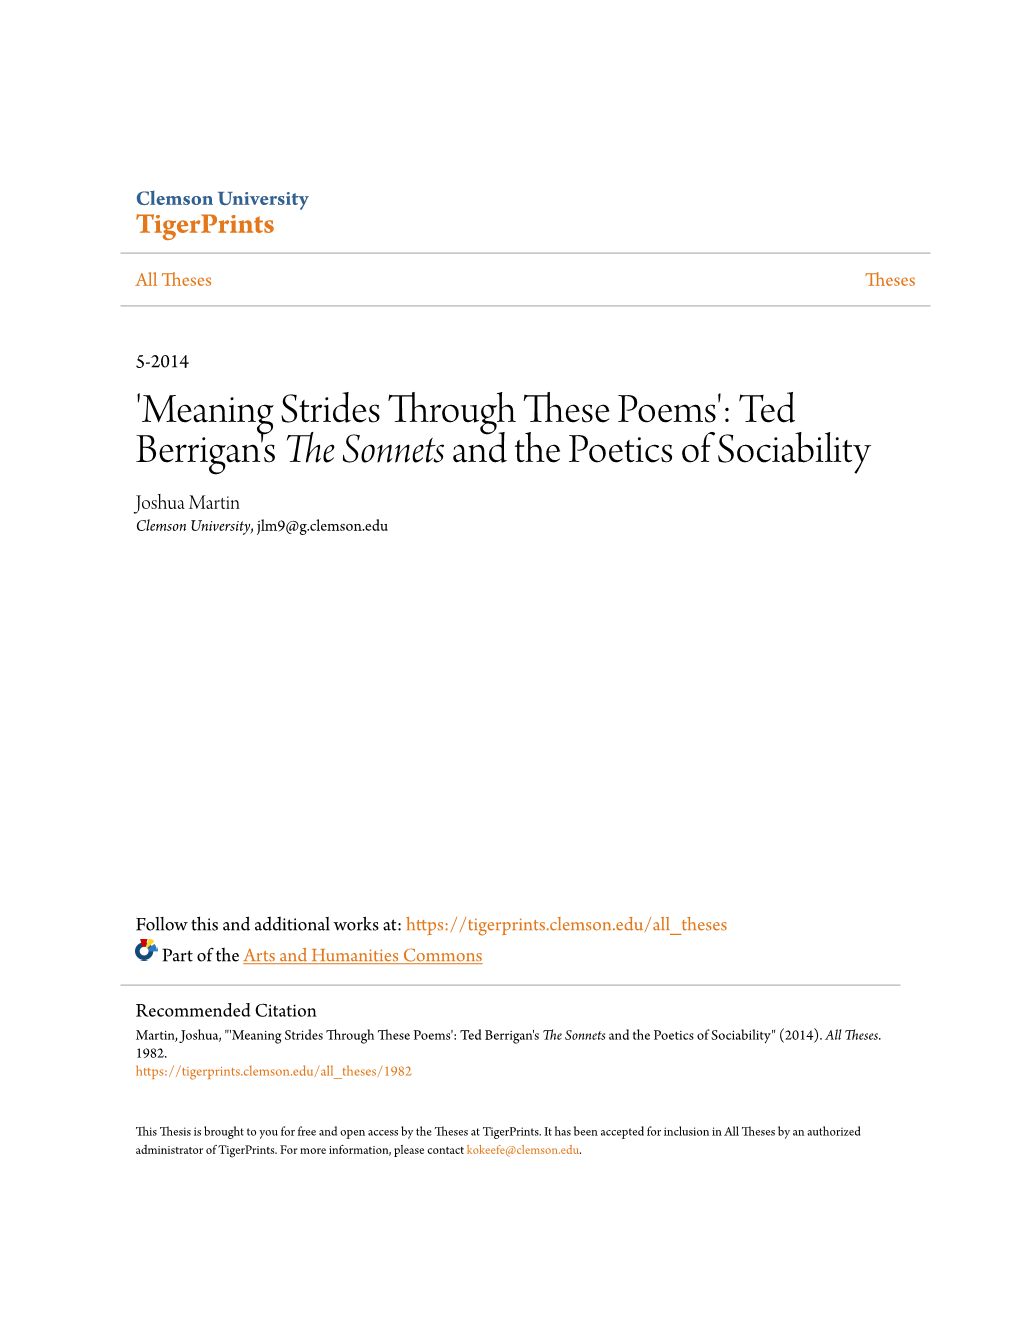 'Meaning Strides Through These Poems': Ted Berrigan's the Sonnets and the Poetics of Sociability" (2014)